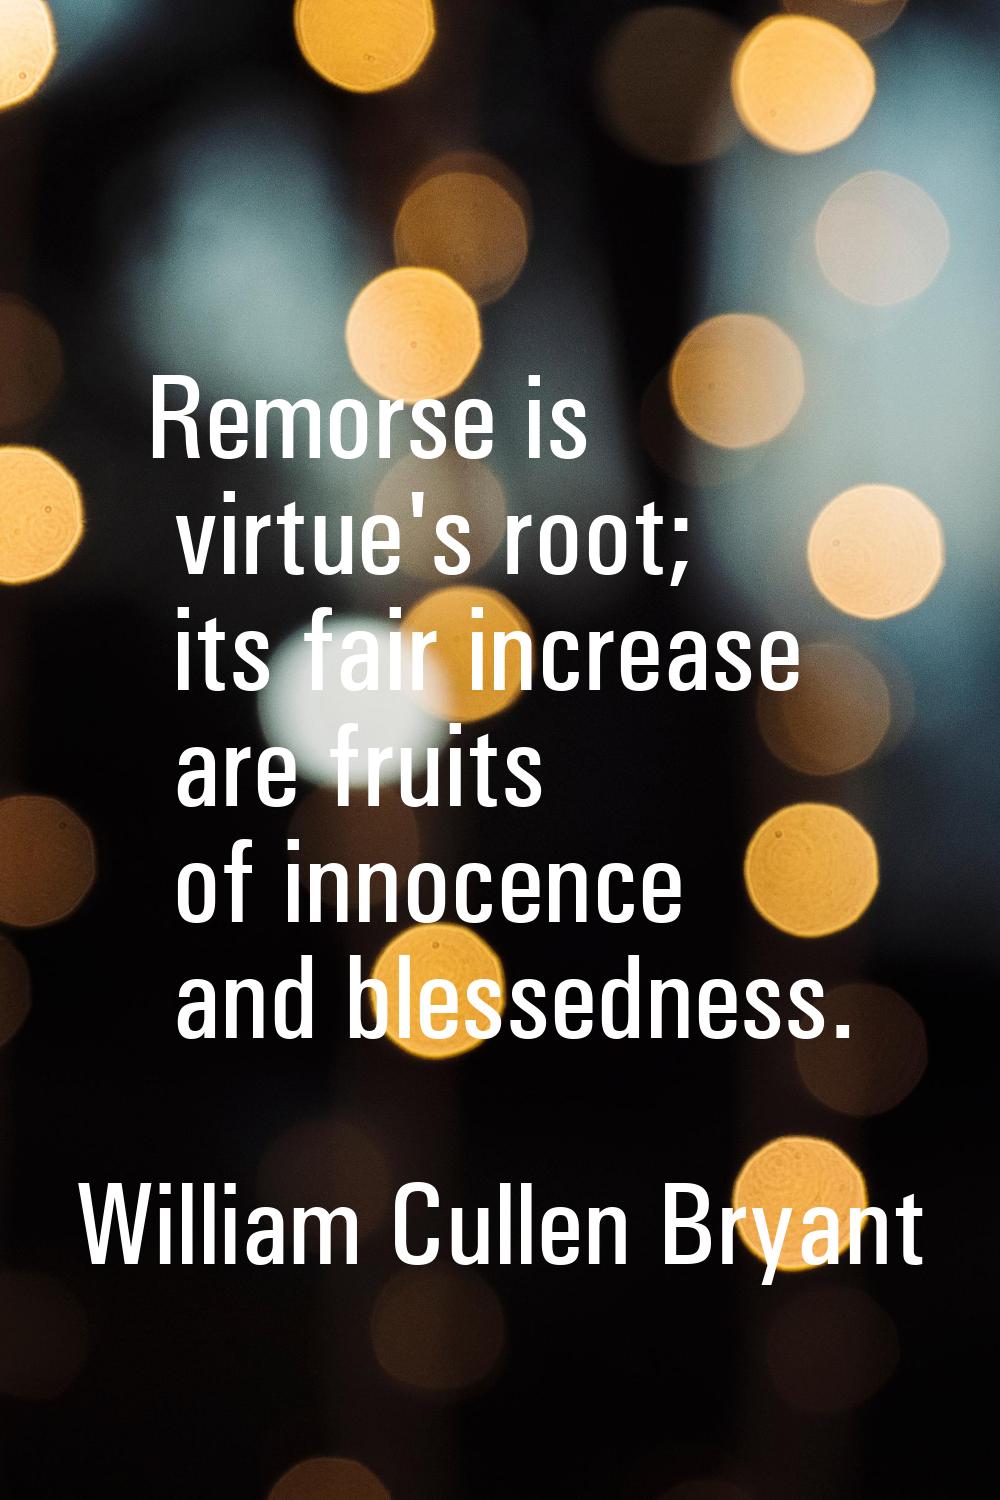 Remorse is virtue's root; its fair increase are fruits of innocence and blessedness.